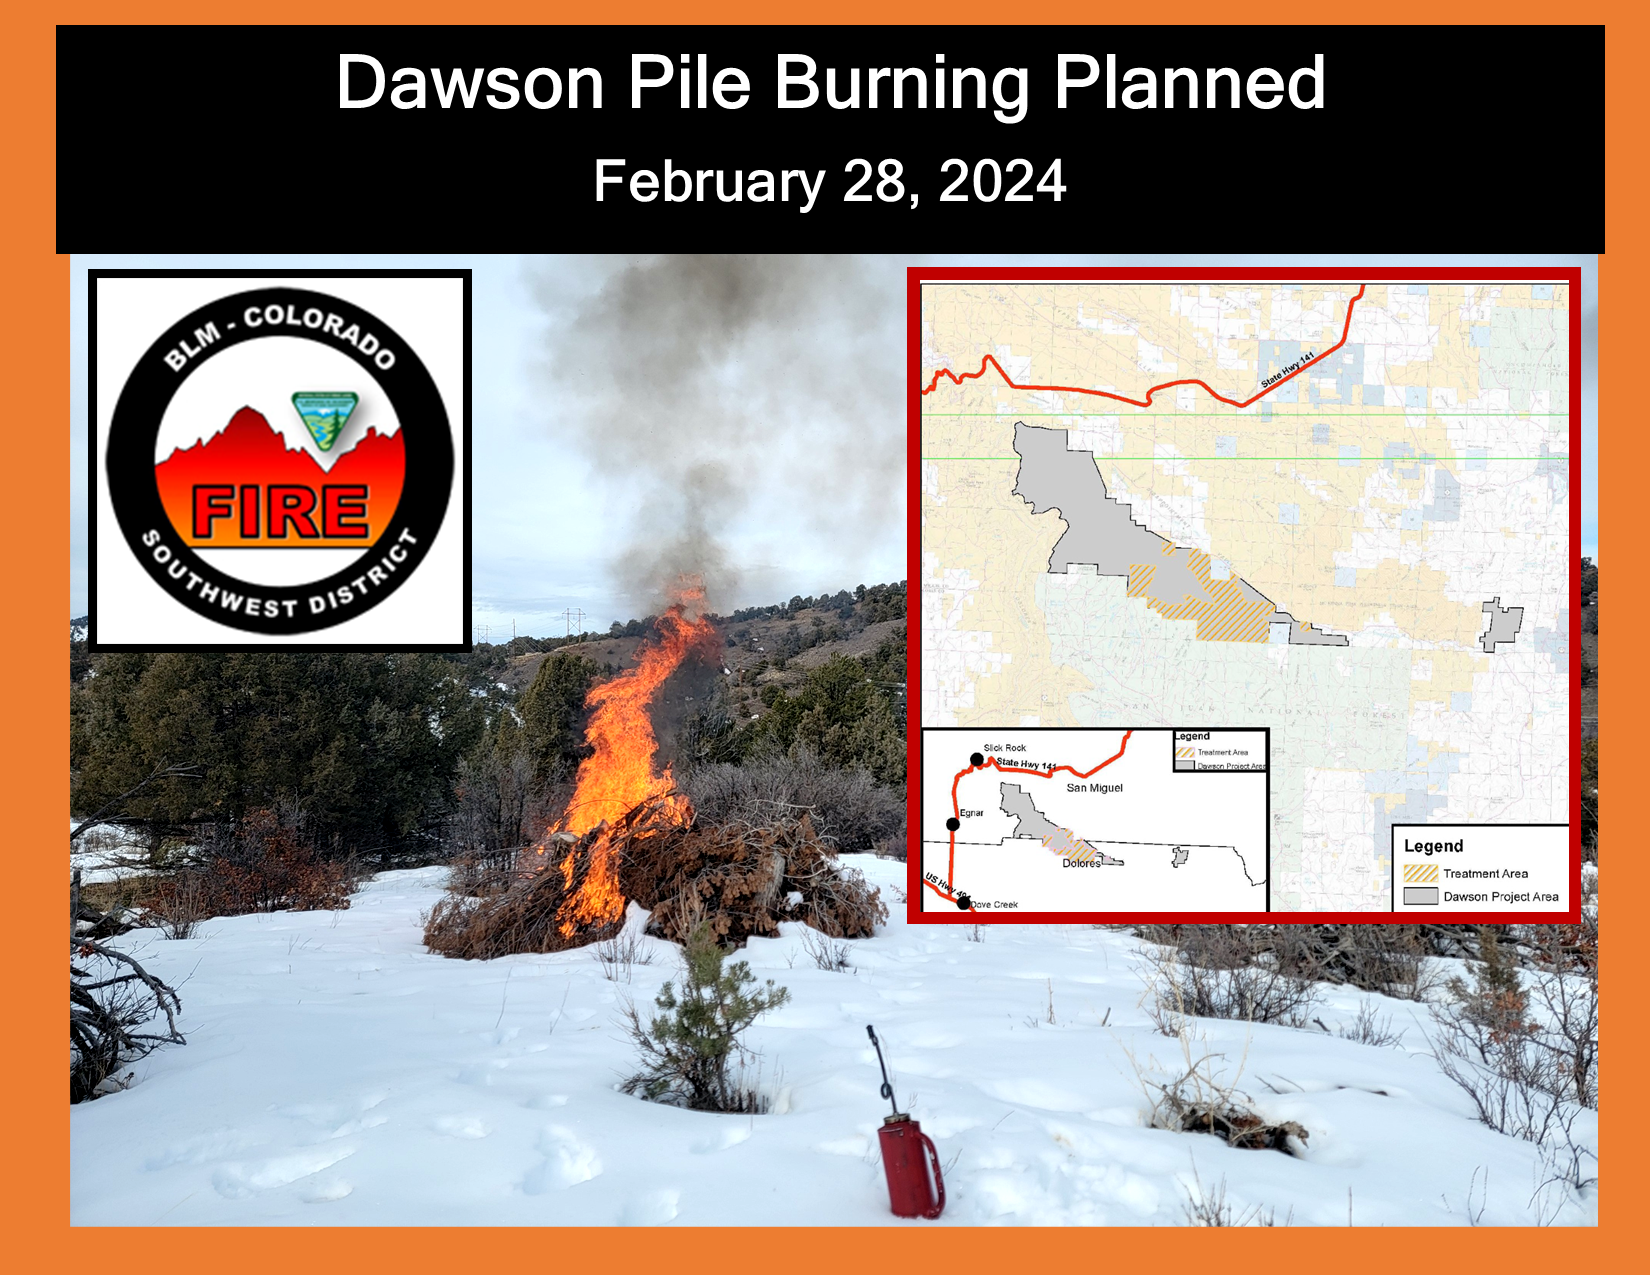 Image with text Dawson Pile Burning Planned, BLM Colorado Southwest District Fire logo. Image of area map showing Dawson project area northeast of Dove Creek, CO and burning slash piles with flames, smoke, and snow. There is a red drip torch at the bottom. This is what firefighters use to ignite piles. 